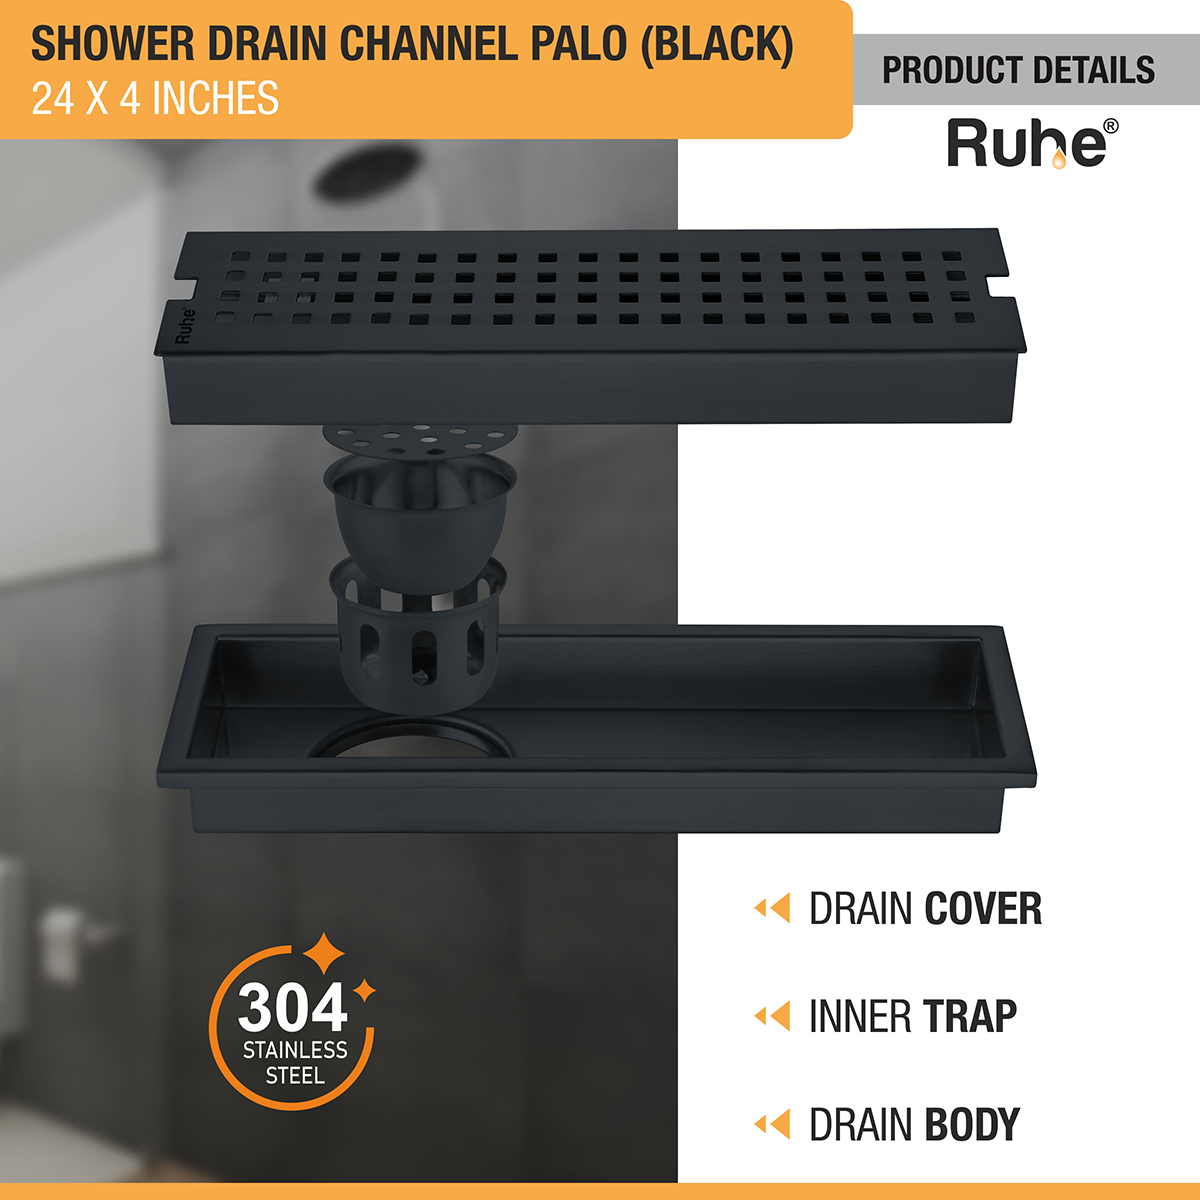 Palo Shower Drain Channel (24 x 4 Inches) Black PVD Coated with drain cover, inner insect trap, drain body